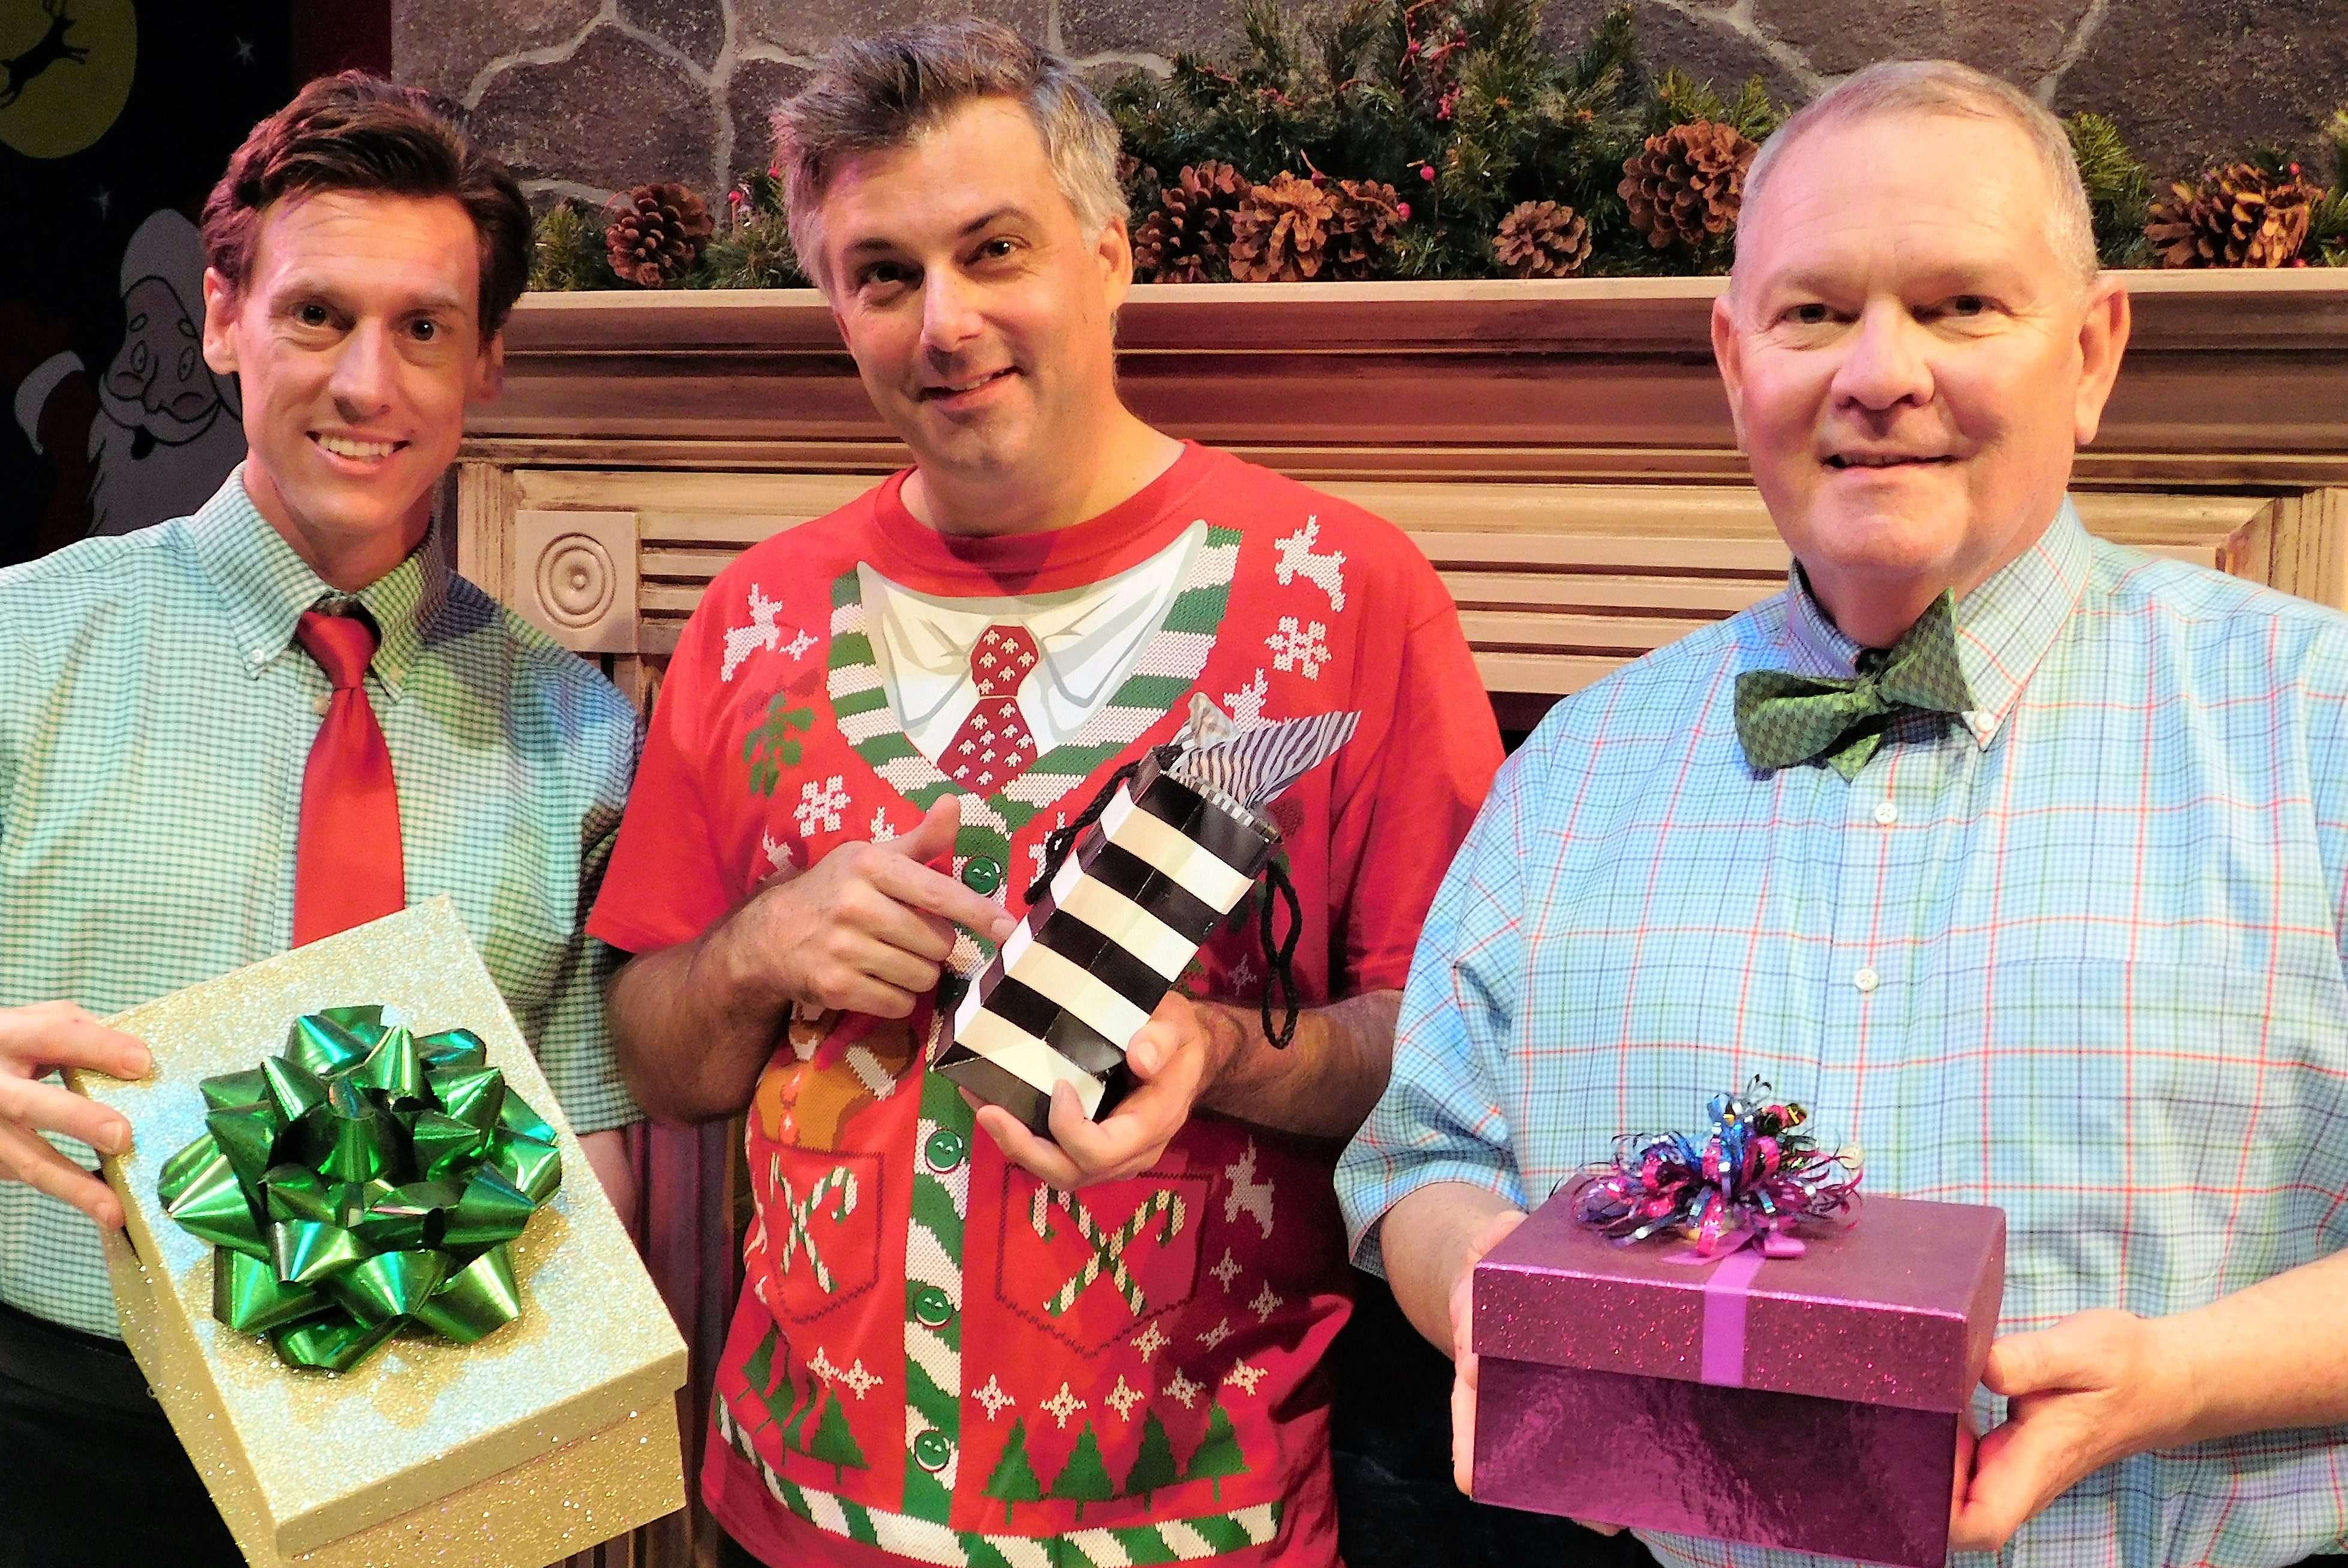 From left, David Patrick Ford, Matthew Lindsay and Mark Chambers offer tidings of good cheer during The Ultimate Christmas Show Abridged) 